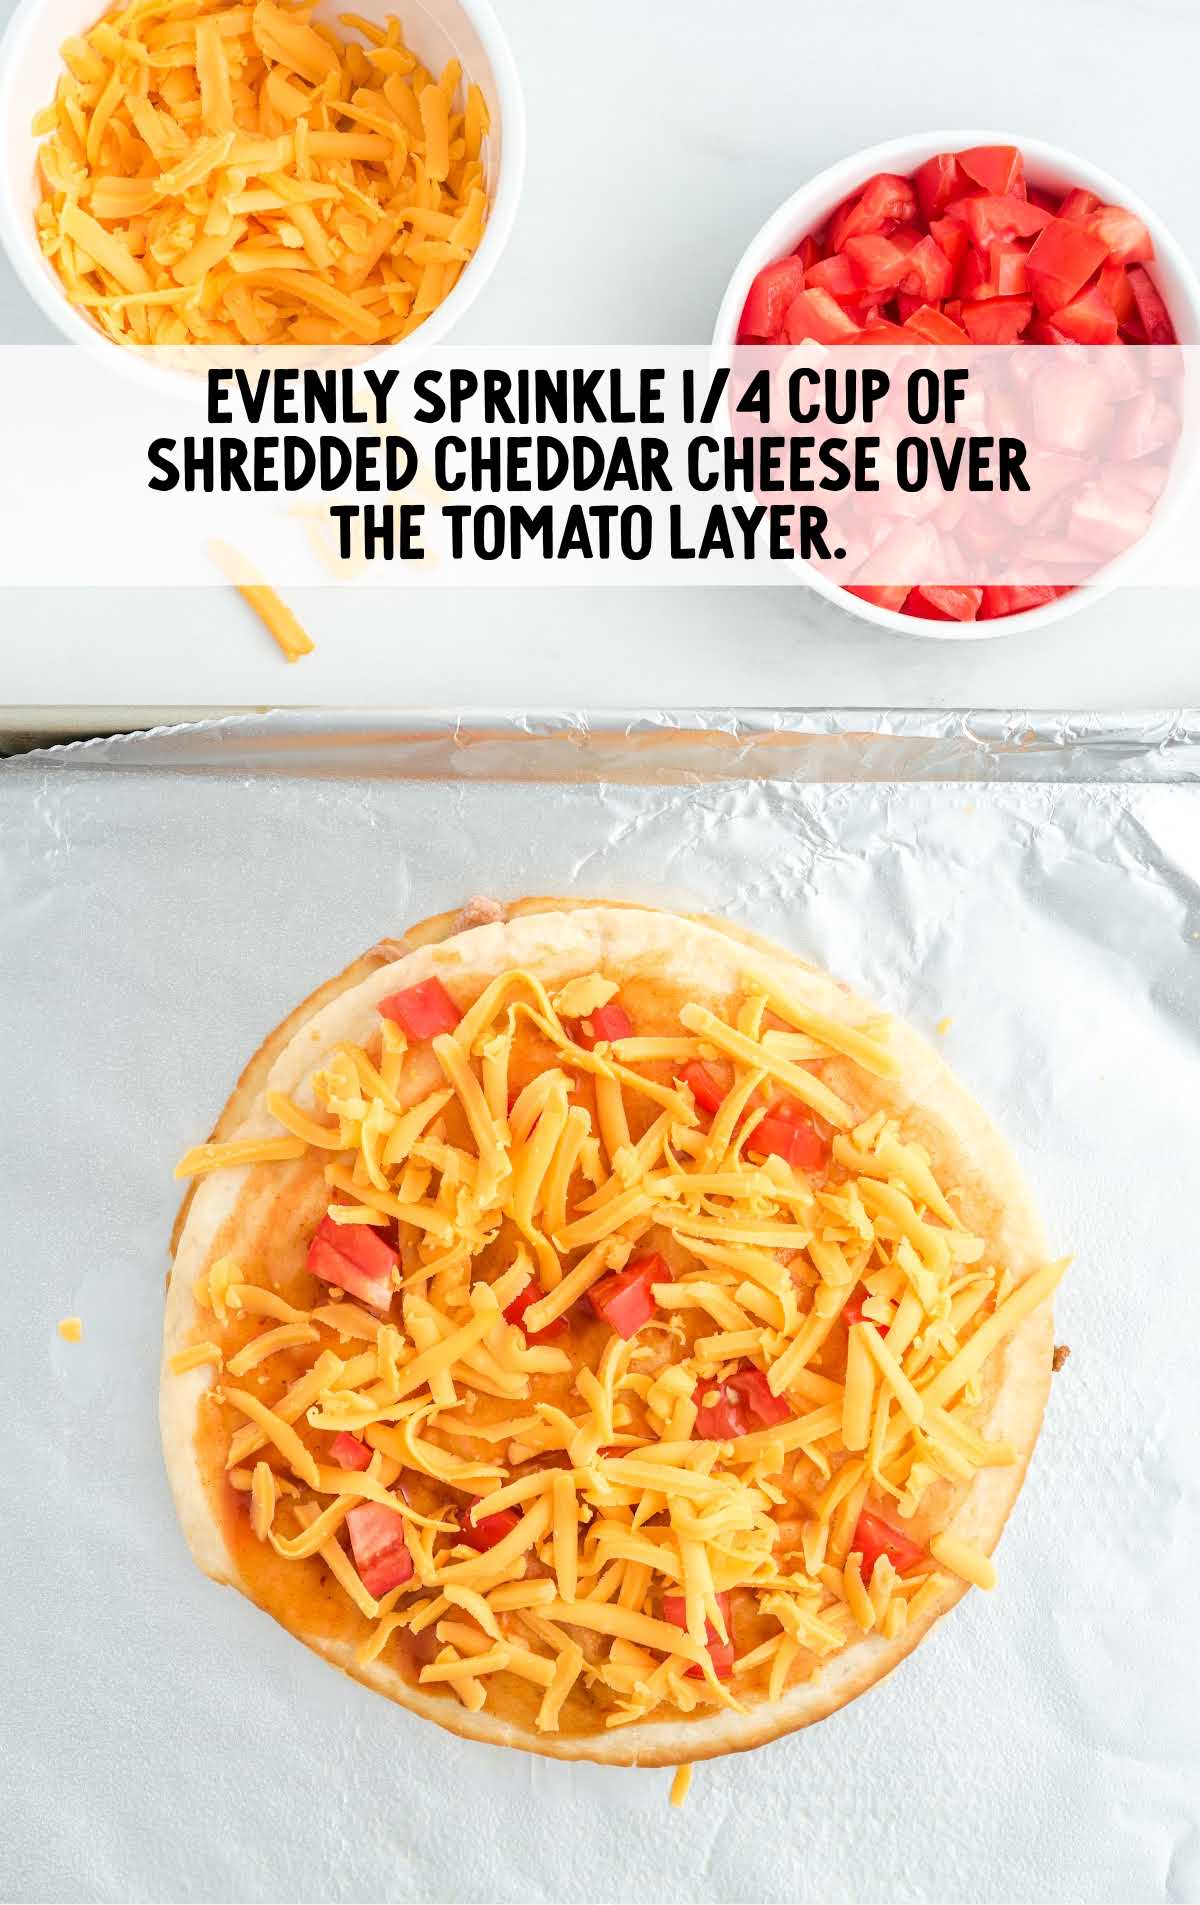 shredded cheese sprinkled over the tomato layer